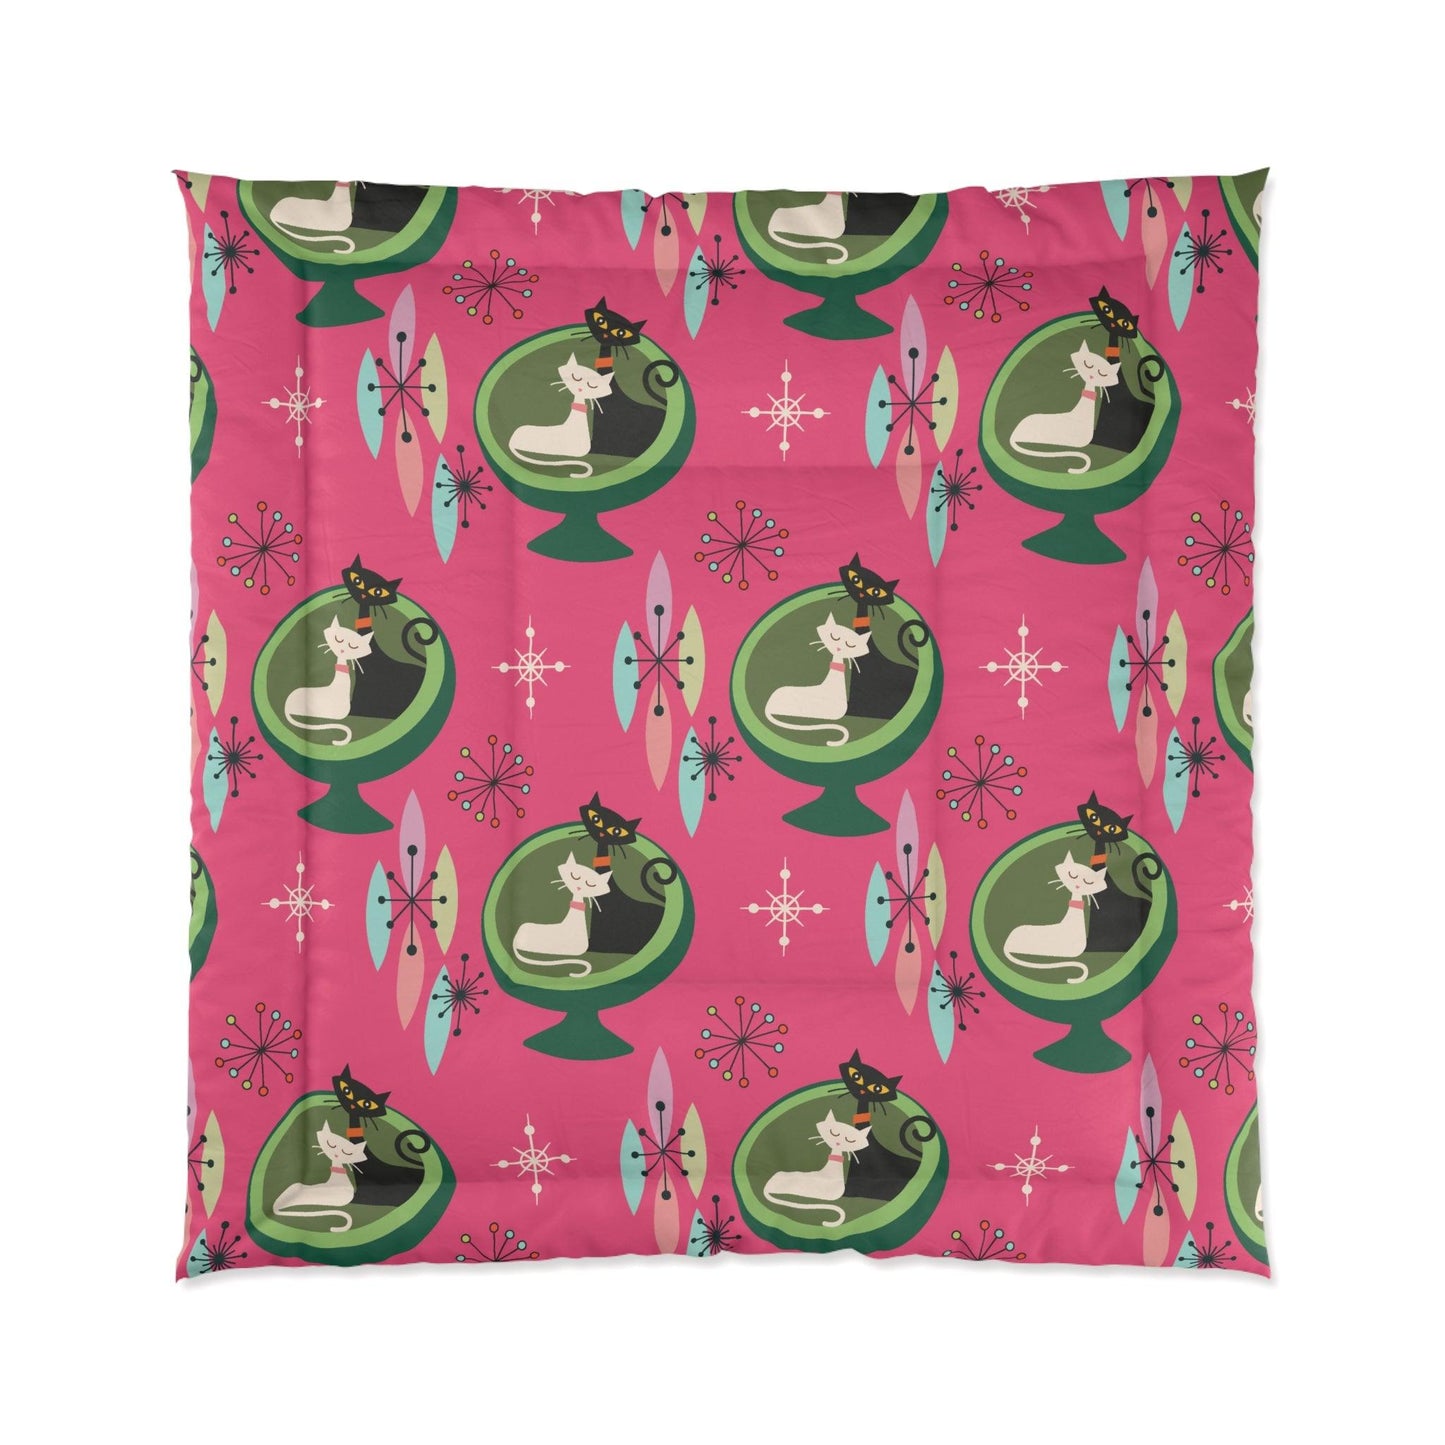 Retro 50s Atomic Cat Couple in Ball Chair Mid Century Mod Pink & Green Comforter | lovevisionkarma.com